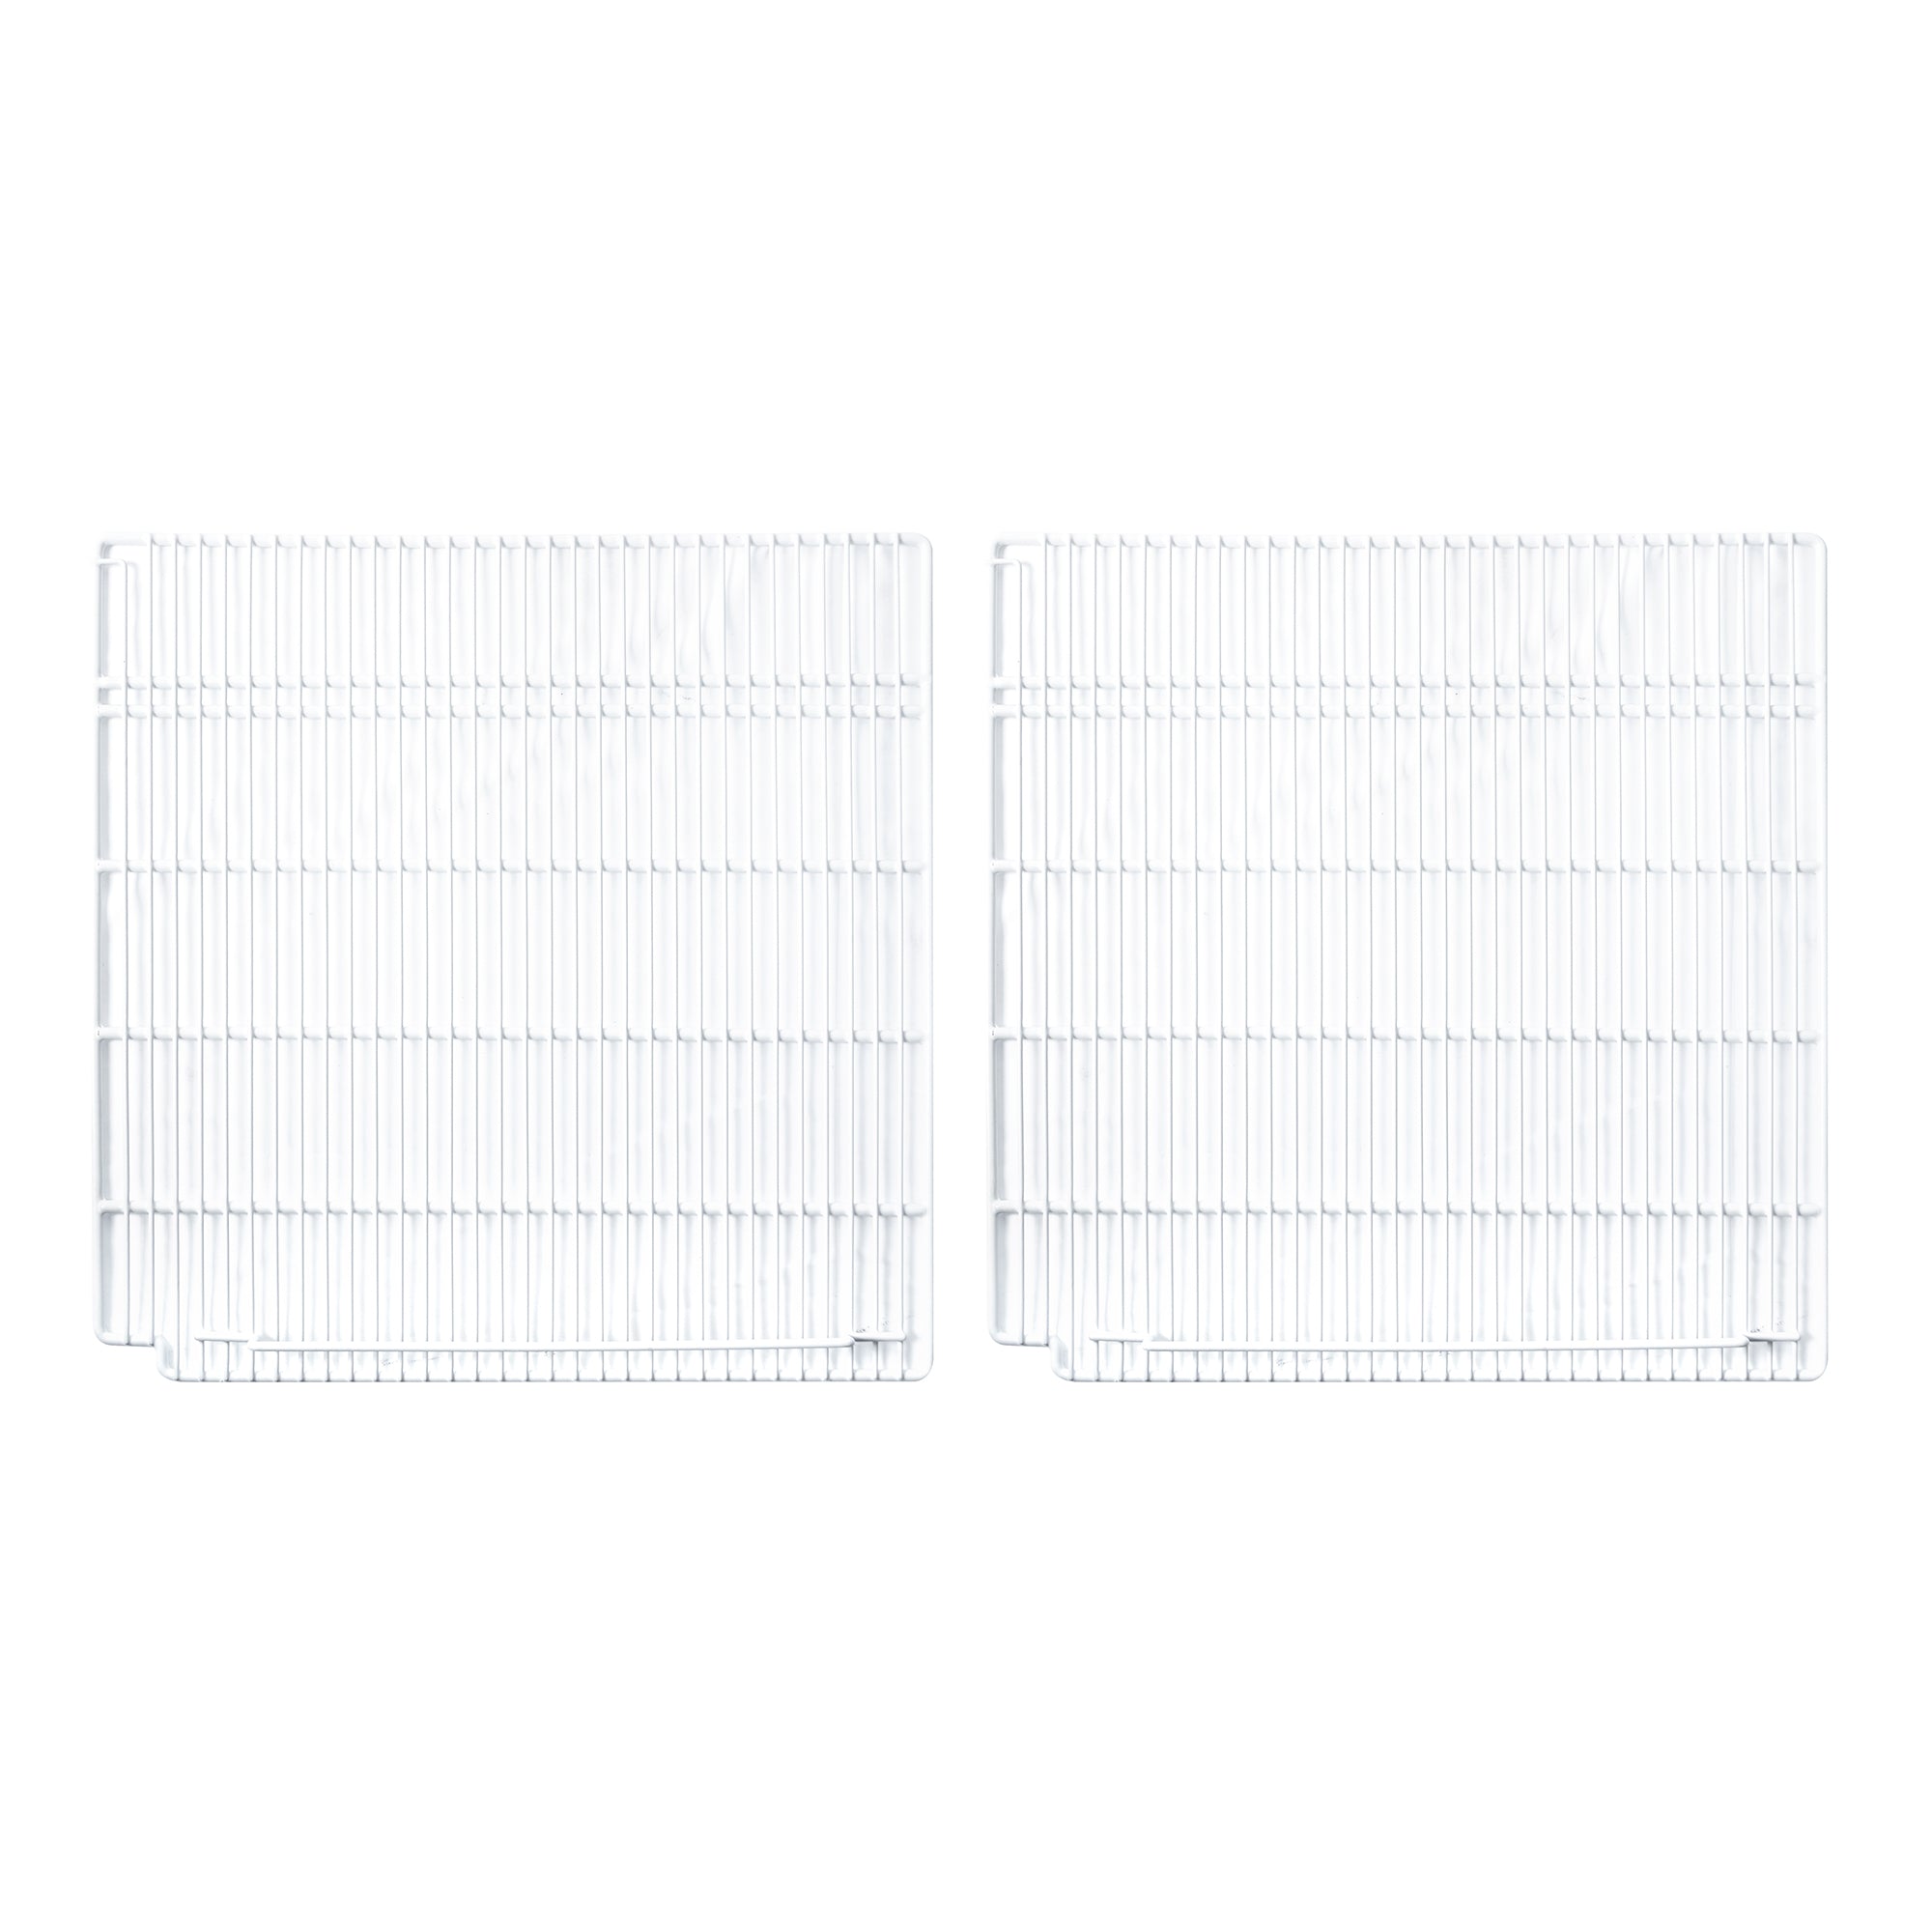 Adjustable Epoxy-coated Wire Shelves (Left) for SD1390F, SC1390F, SD1390FT, SC1390FT - Enhance Organization with Sturdy Utility Shelves - (White) Commercial Refrigerator/Freezer Shelves Set of 2